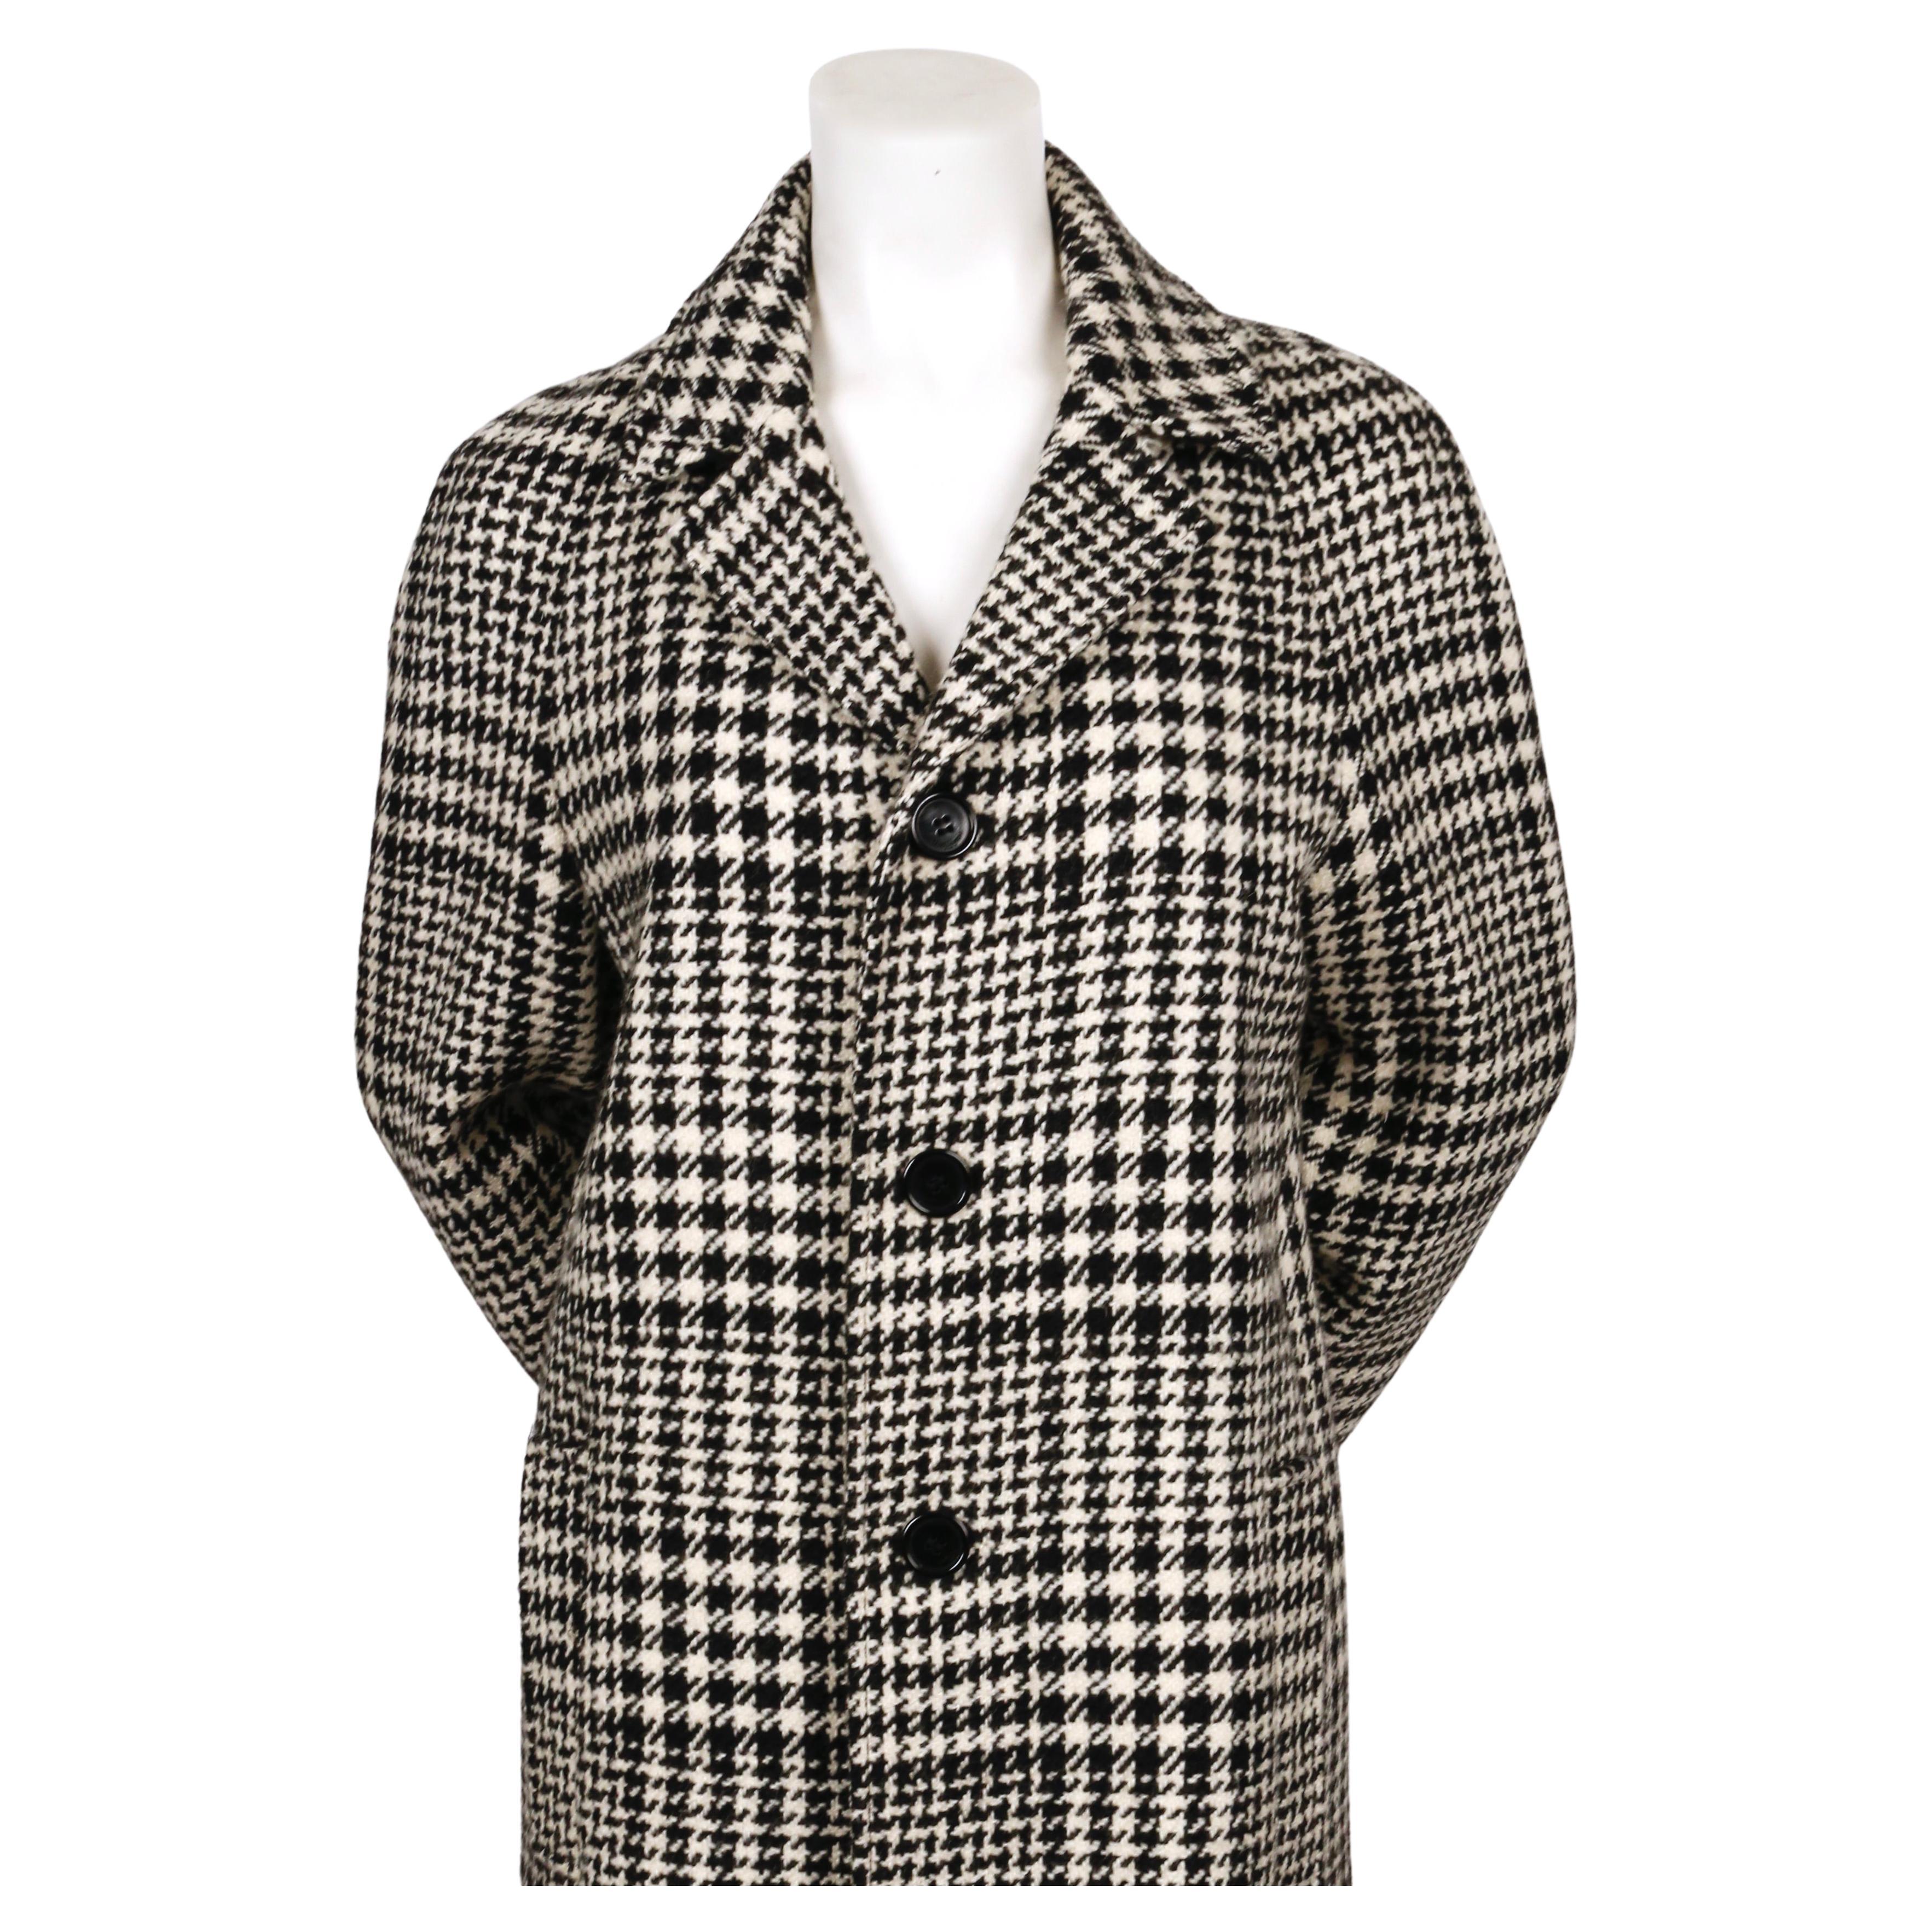 2014 SAINT LAURENT single breasted houndstooth wool runway coat In Excellent Condition For Sale In San Fransisco, CA